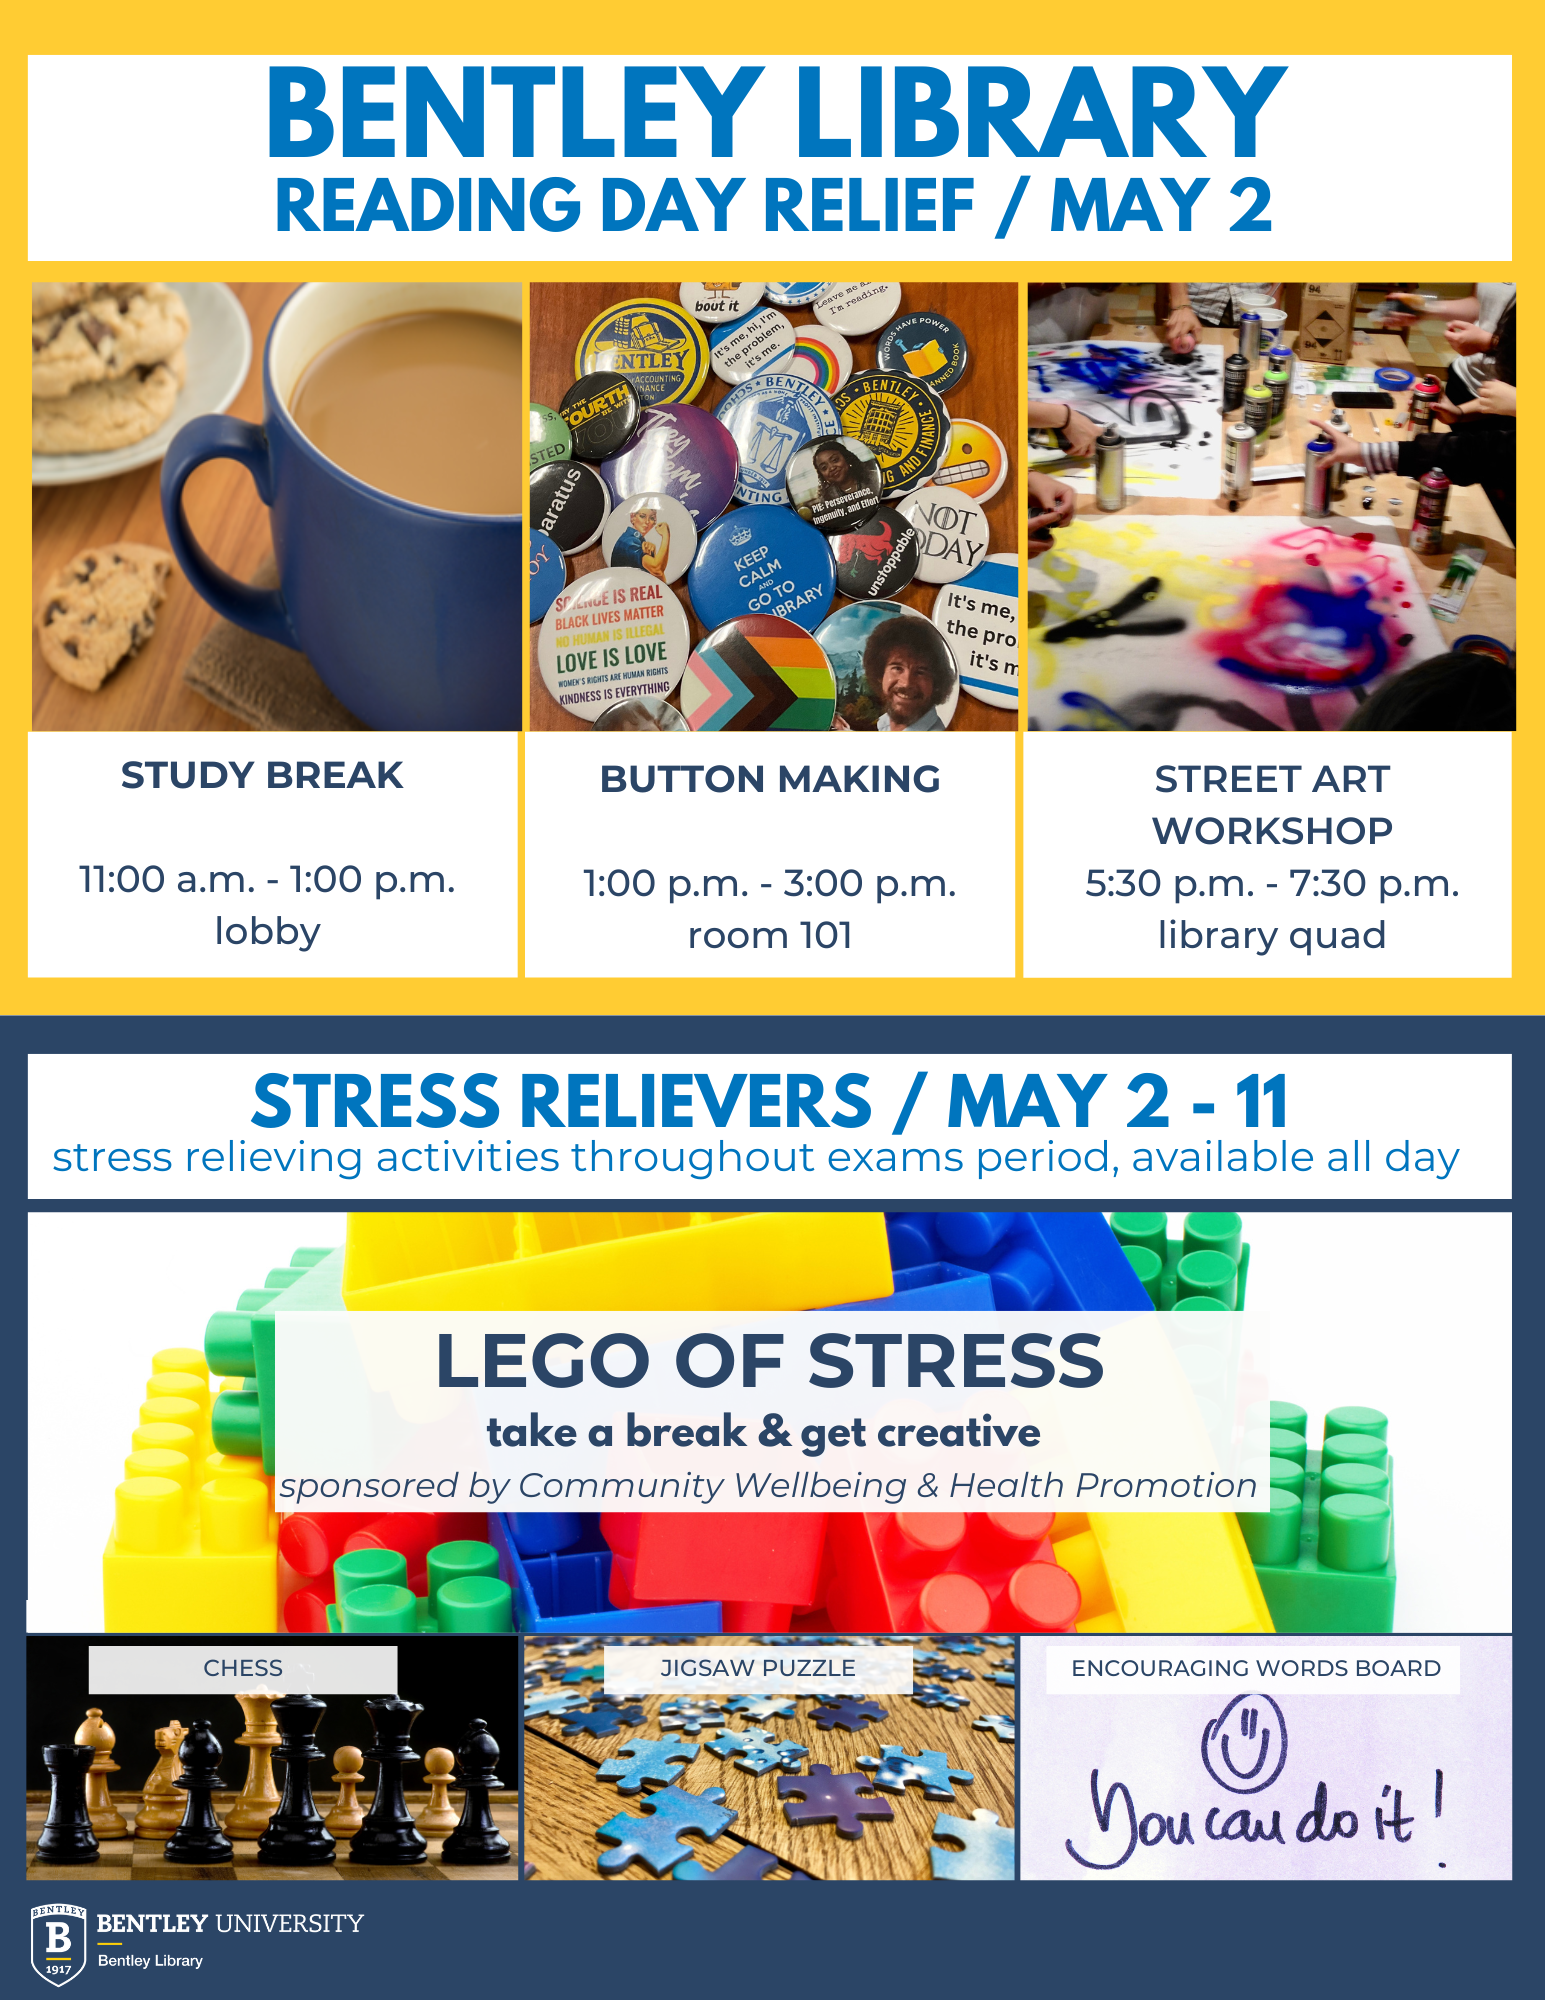 Flyer for event depicting images of activities being offered - coffee, buttons, street art workshop, LEGO, chess, and puzzle pieces.